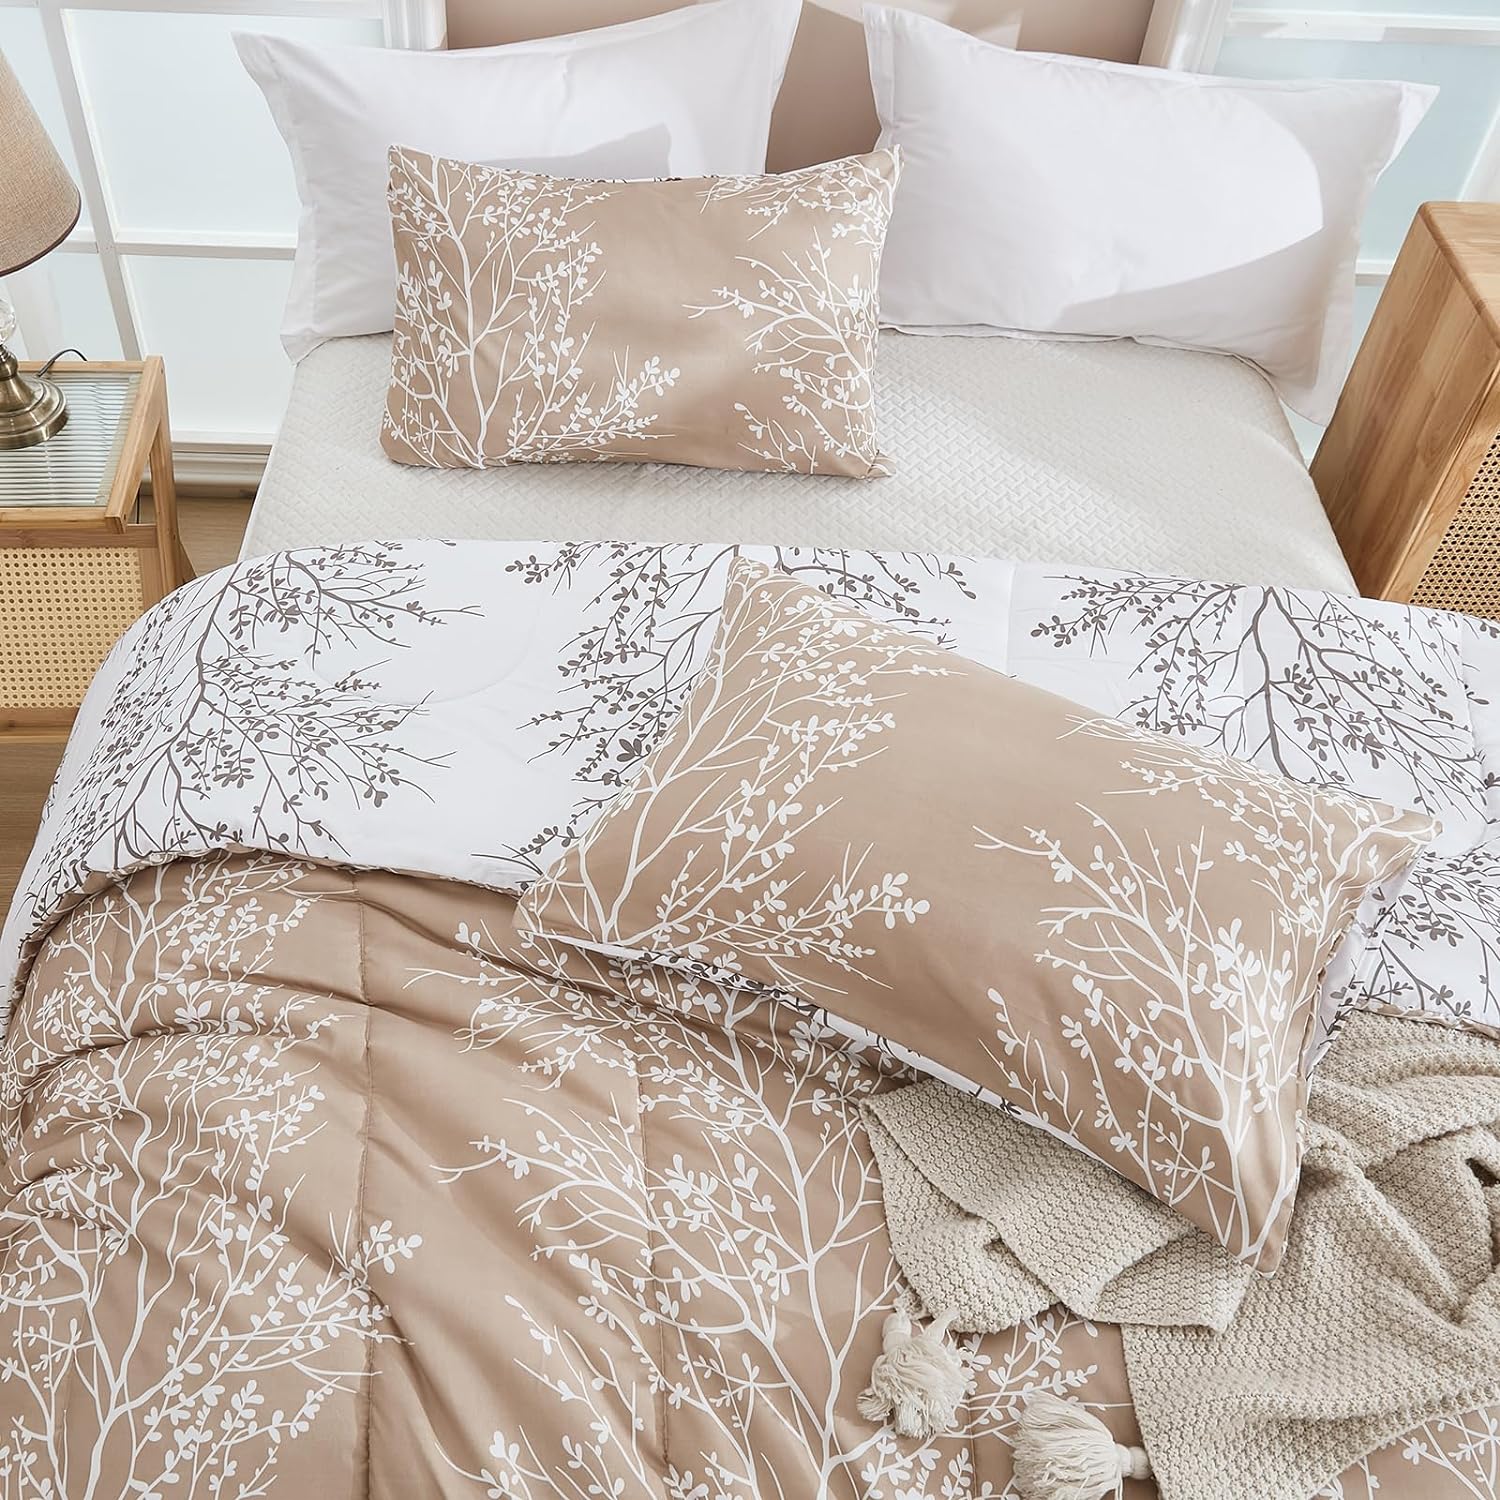 Bedbay Branches Leaf Bedding Queen Floral Comforter Set Beige and White Floral Botanical Reversible Design Soft Microfiber Breathable Cozy Bedding Fluffy 3 Pieces Girls Boys Queen Bedding Set